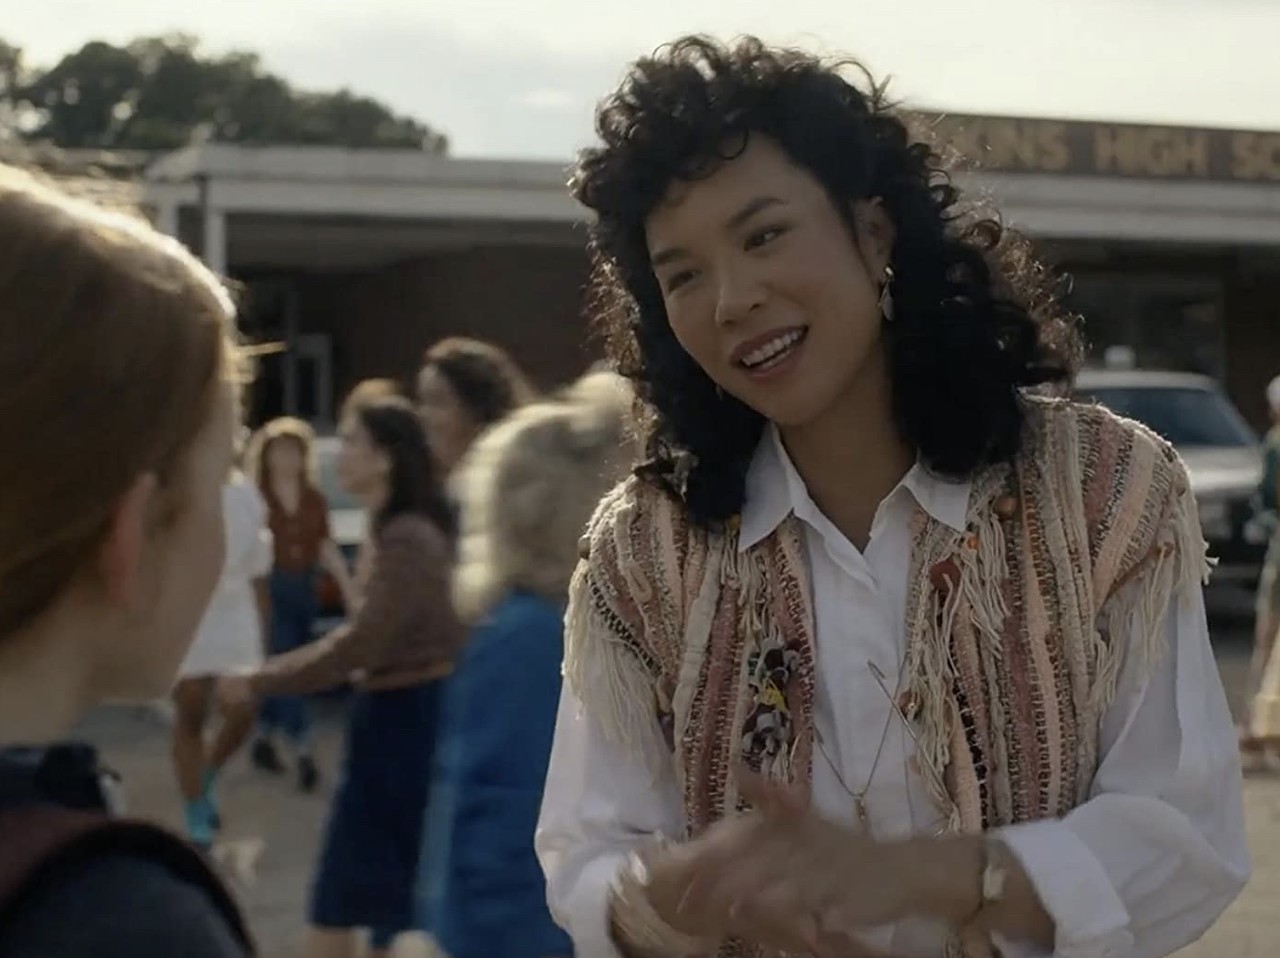 Regina Ting Chen
Actress Regina Ting Chen, who appeared in Stranger Things Season 4, moved to San Antonio with her family from Hawaii when she was a teen. She ended up enrolling in UT Austin, where her aunt was a pharmacy professor.